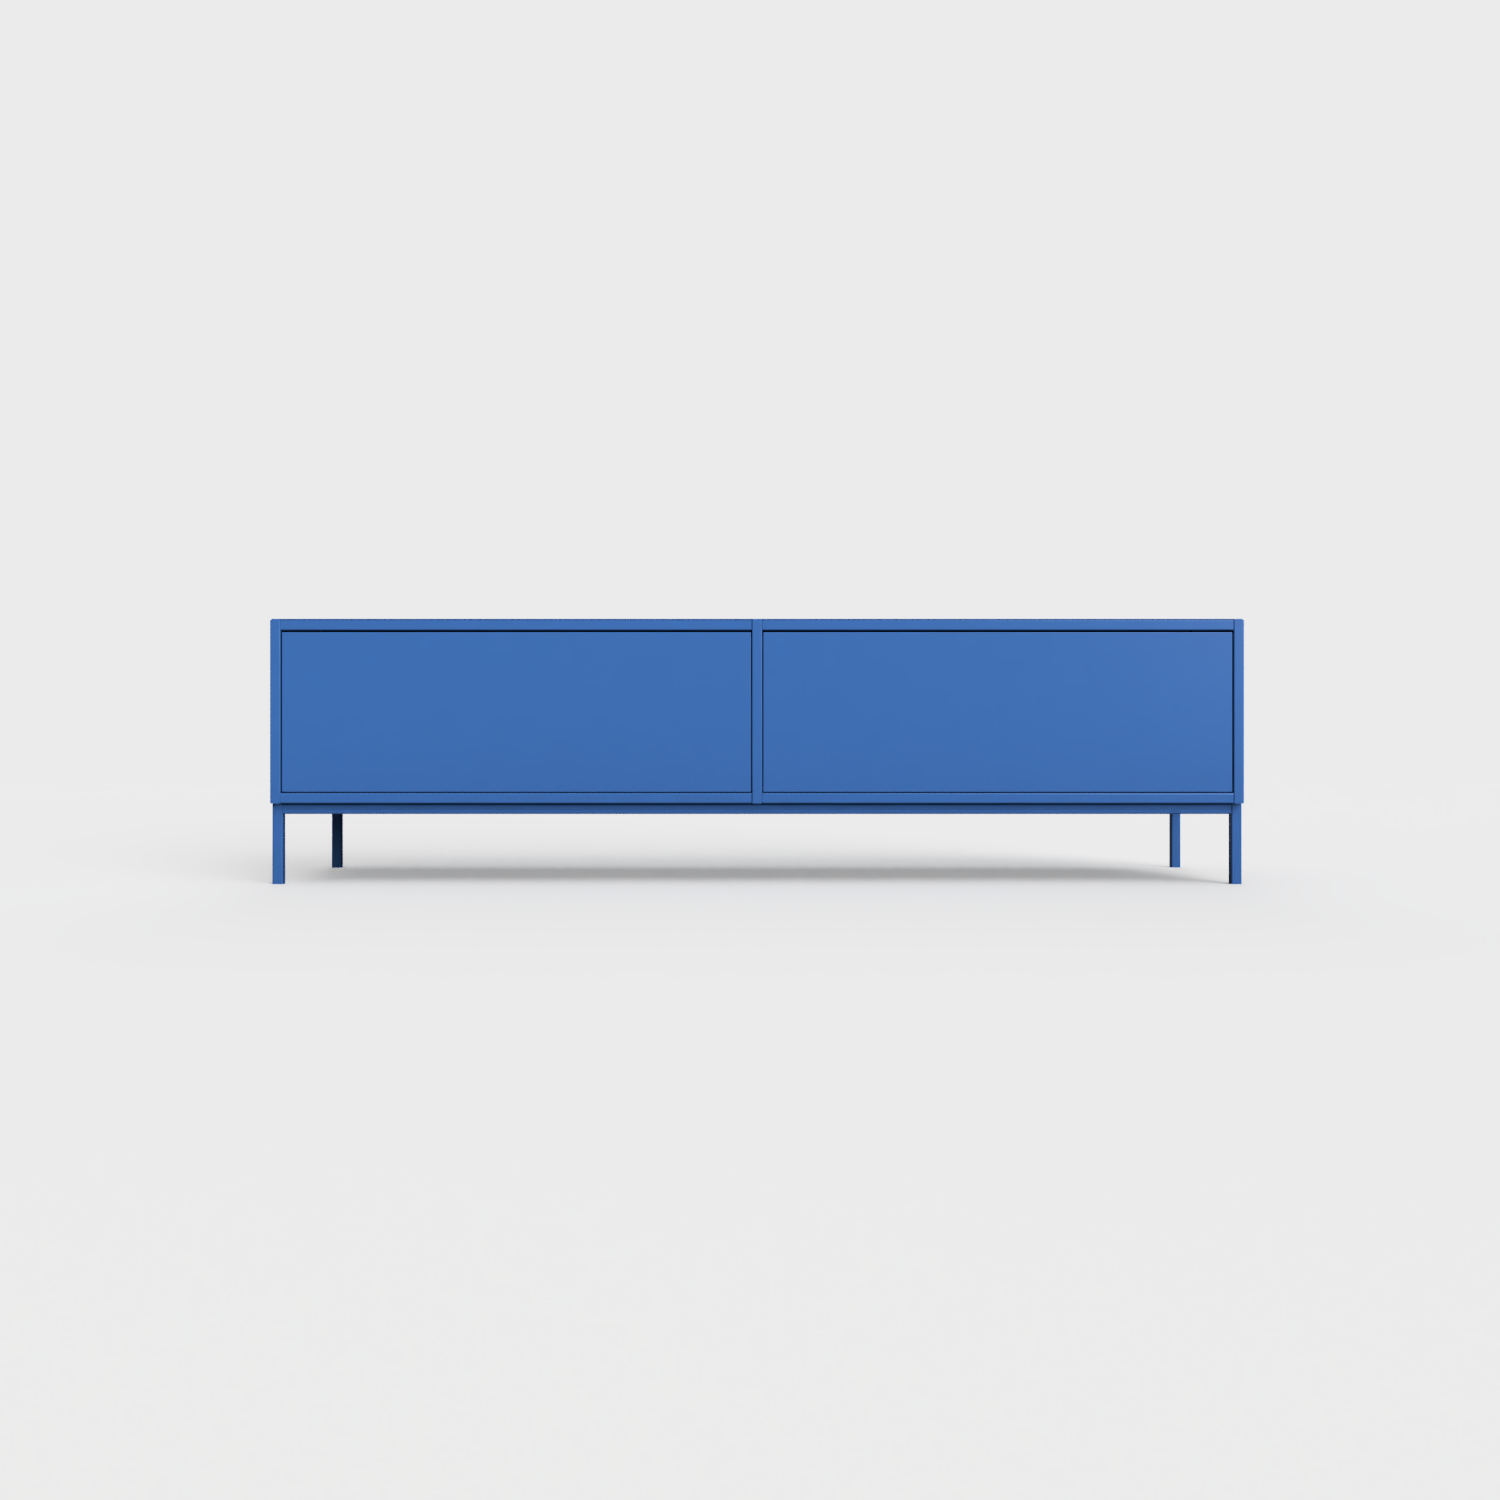 Prunus 01 Lowboard in Azure color, powder-coated steel, elegant and modern piece of furniture for your living room